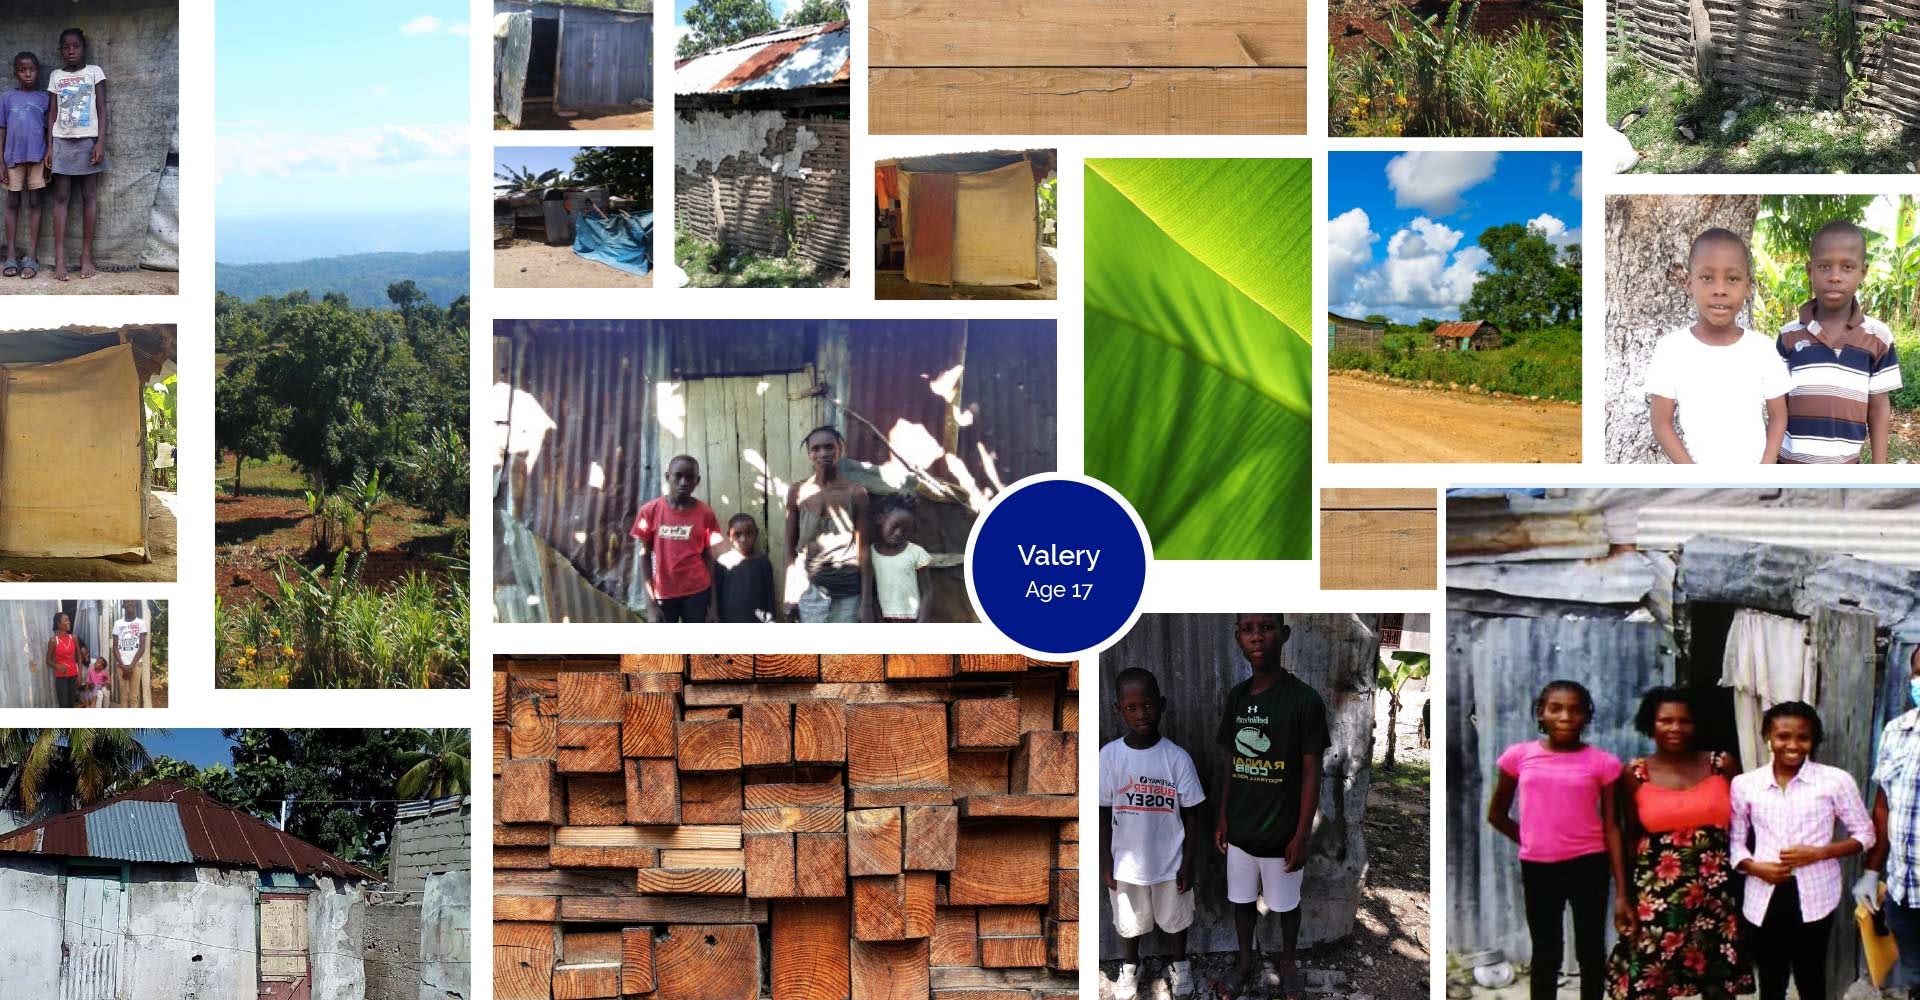 A photo collage of Valery's home and family in Haiti